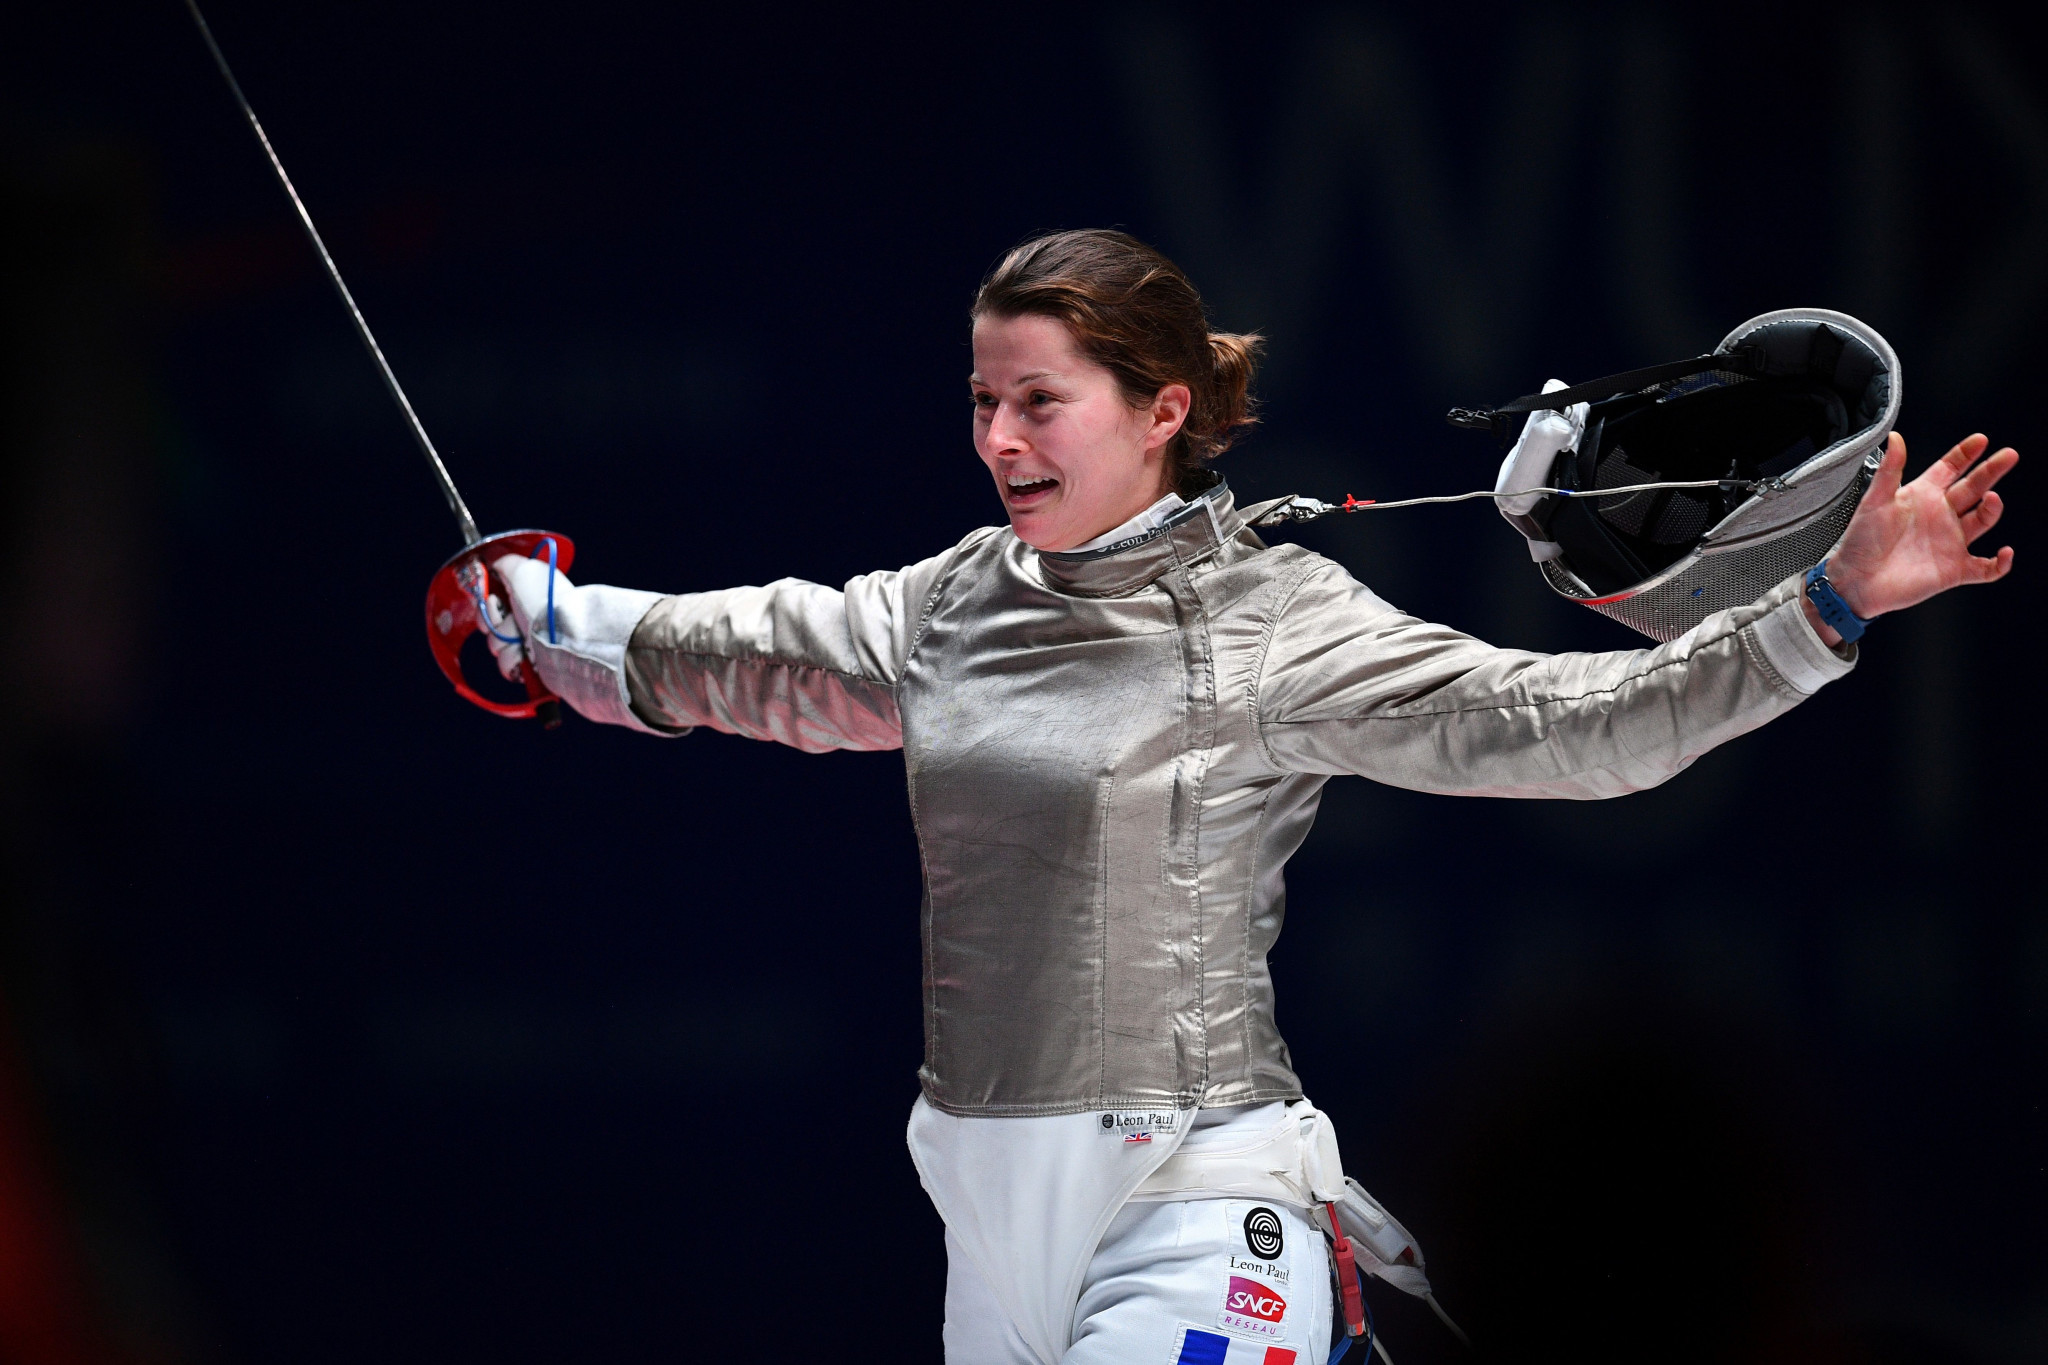 France's Cécilia Berder will be vying for top honours at the FIE Women's Sabre World Cup in Sint-Niklaas in Belgium ©Getty Images